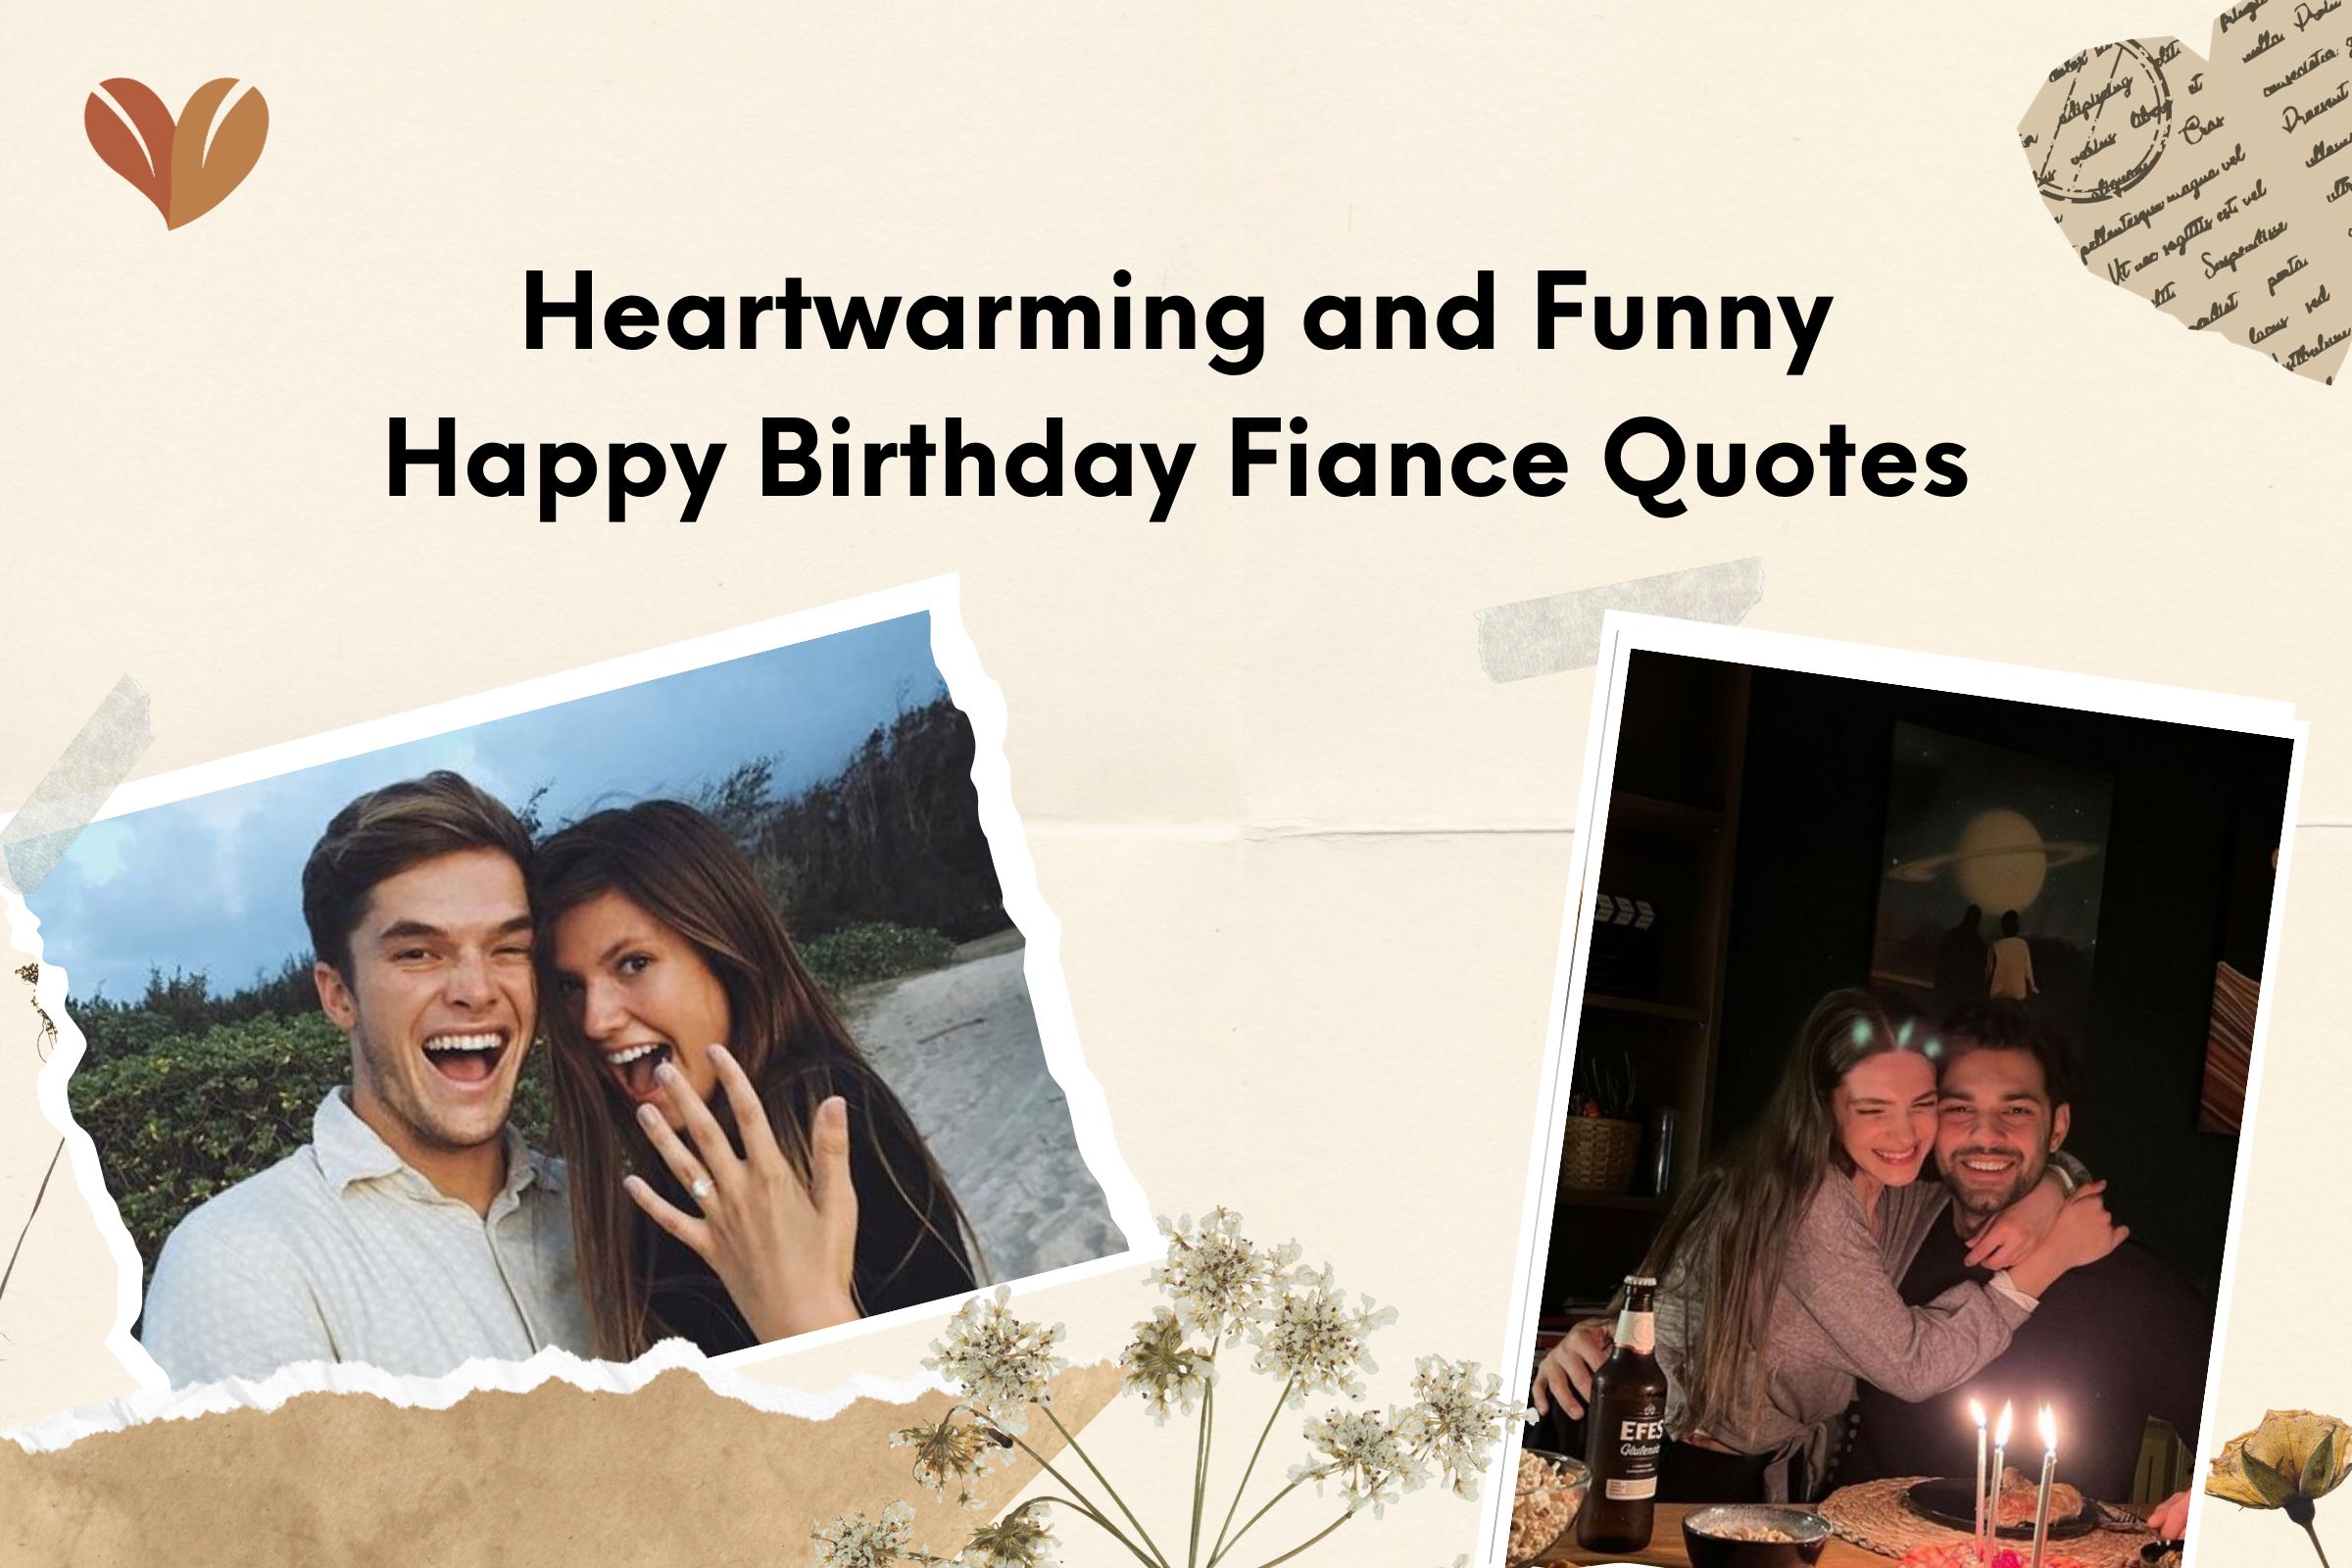 Heartwarming and FunnyHappy Birthday Fiance Quotes